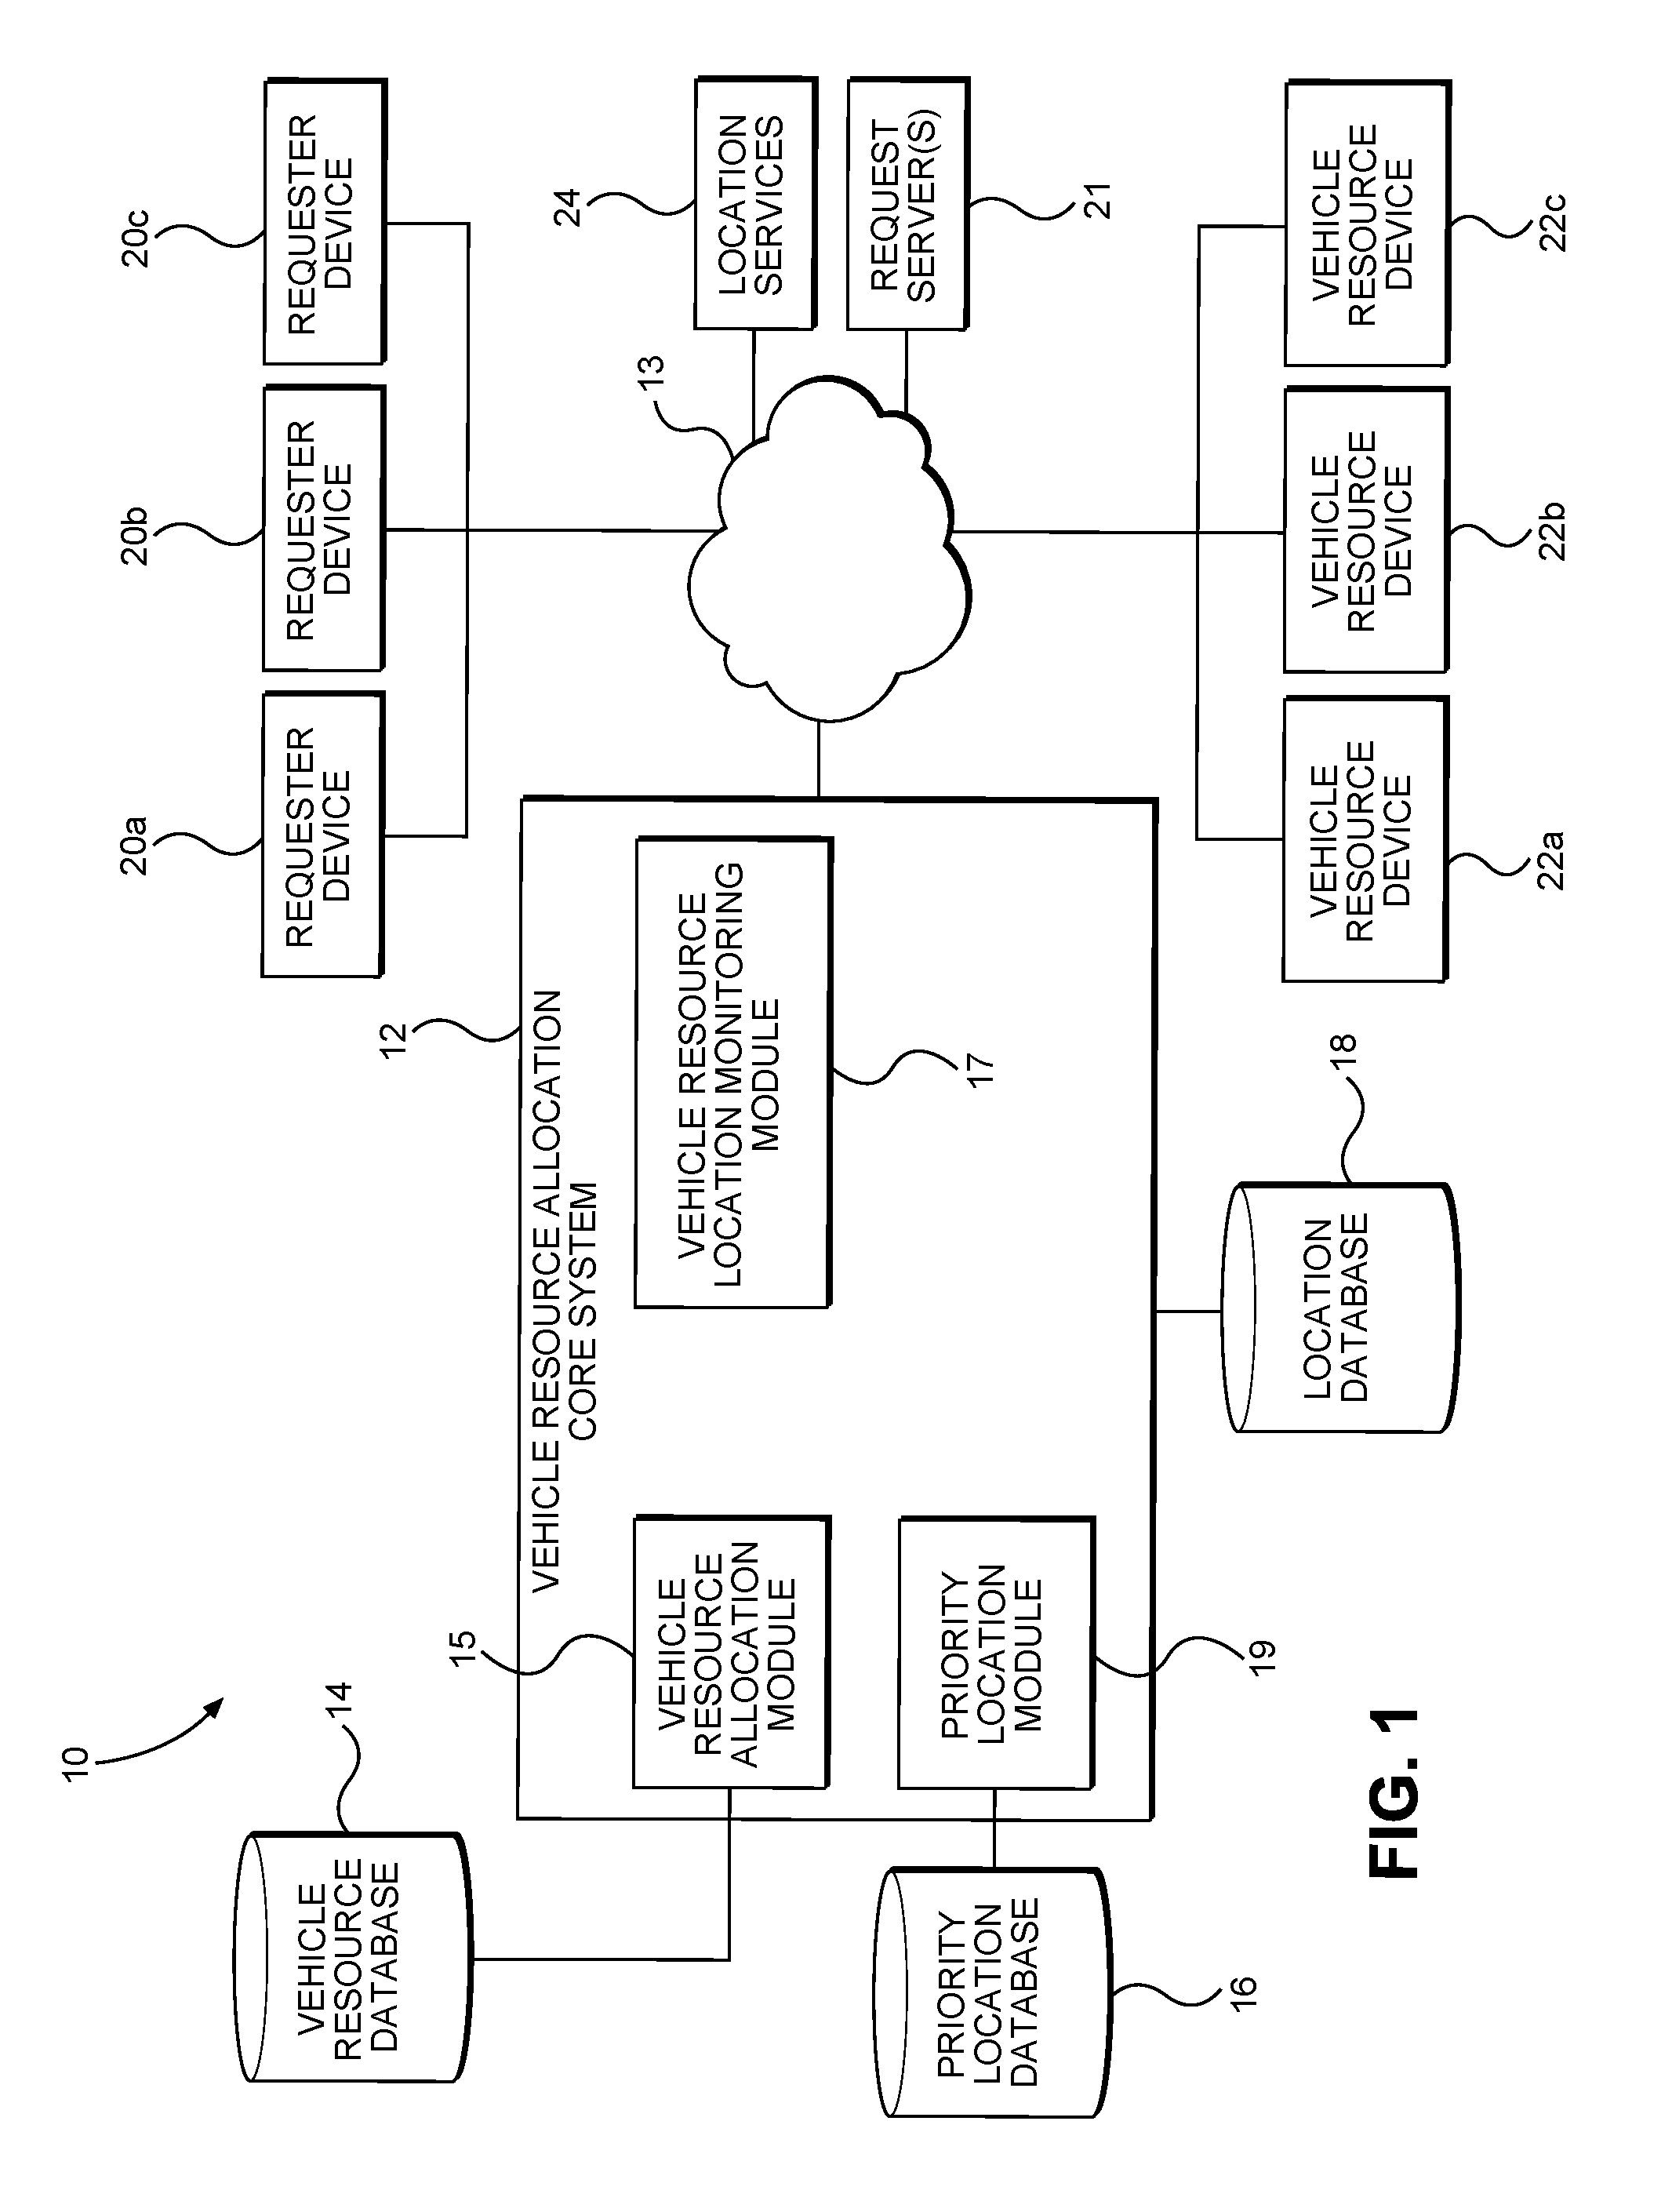 Systems and Methods for Vehicle Resource Management